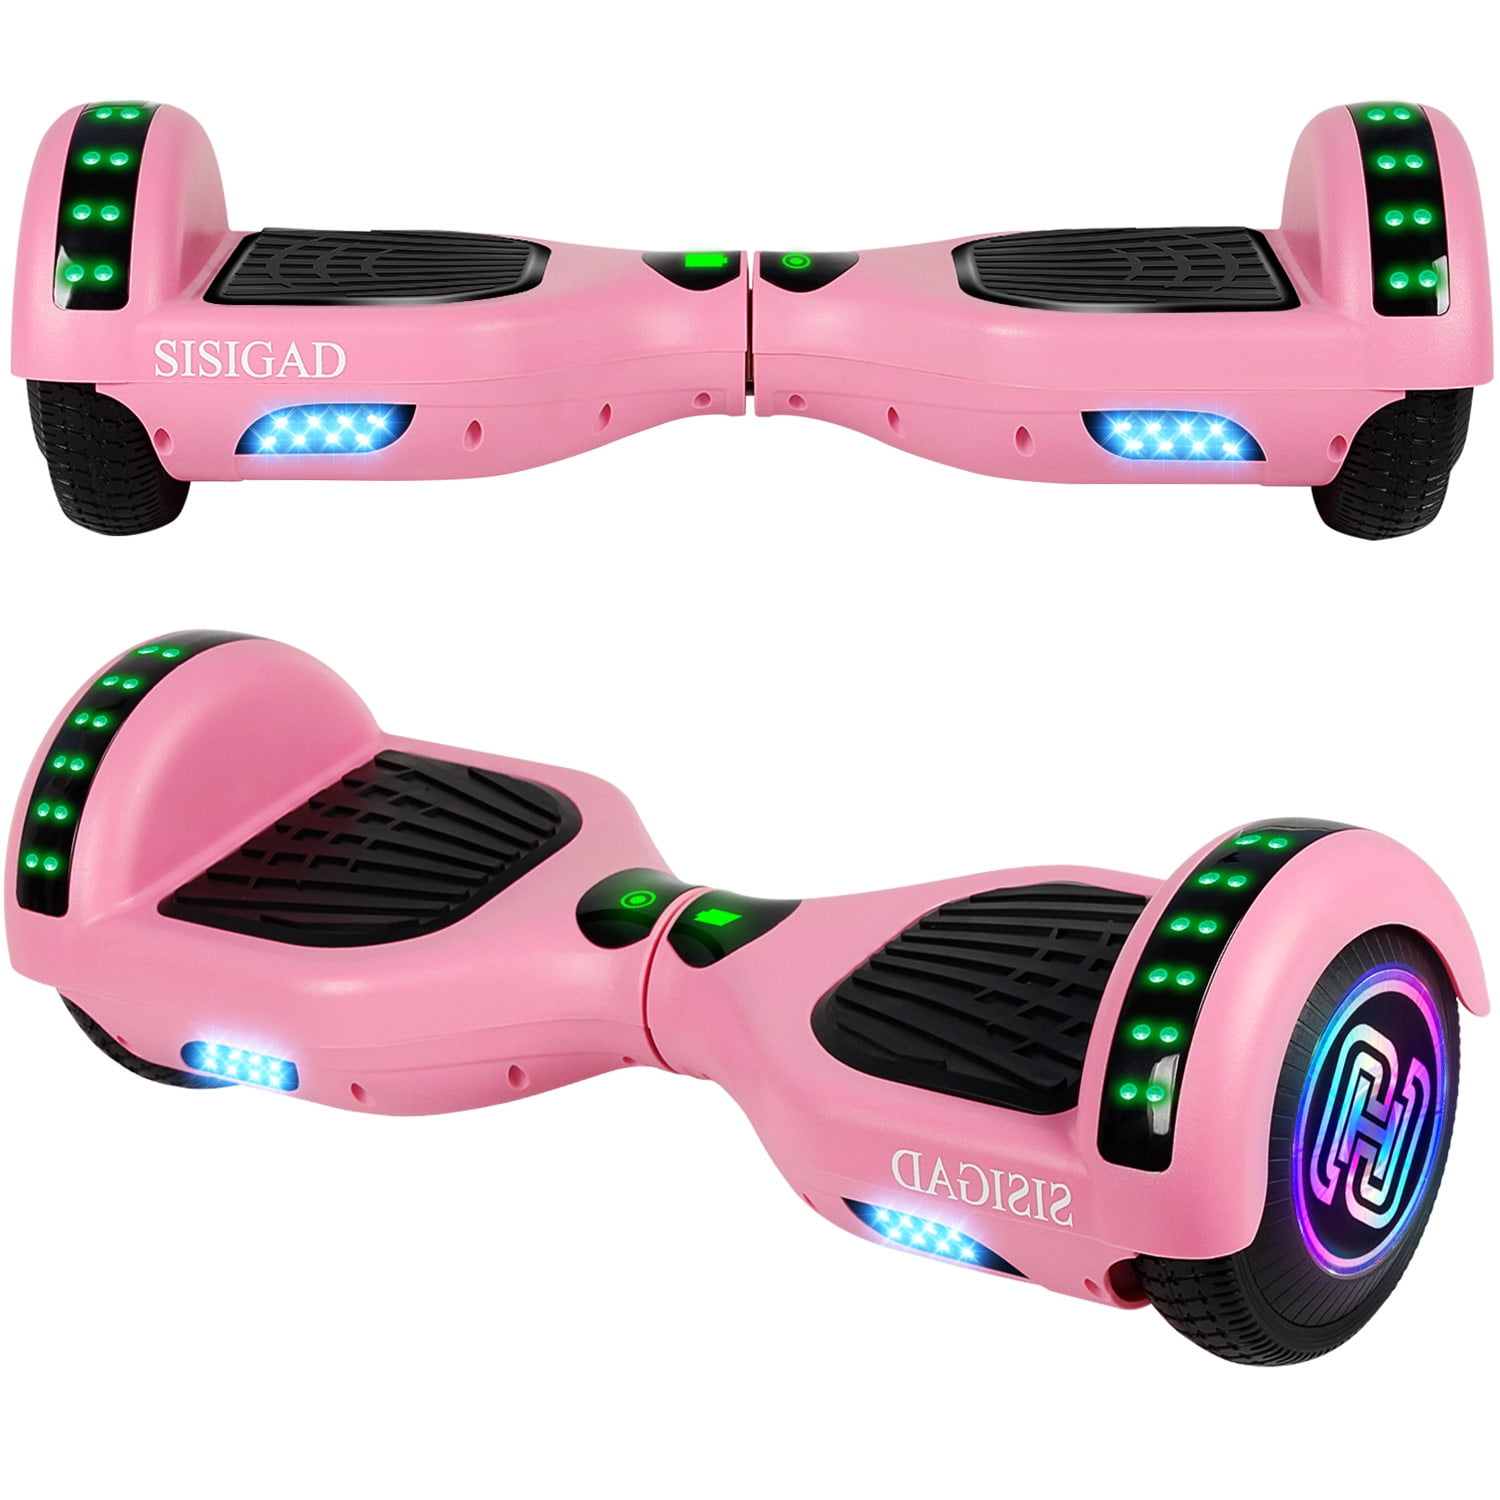 Classic Series No Bluetooth SISIGAD 6.5 Two-Wheel Self Balancing Hoverboard 